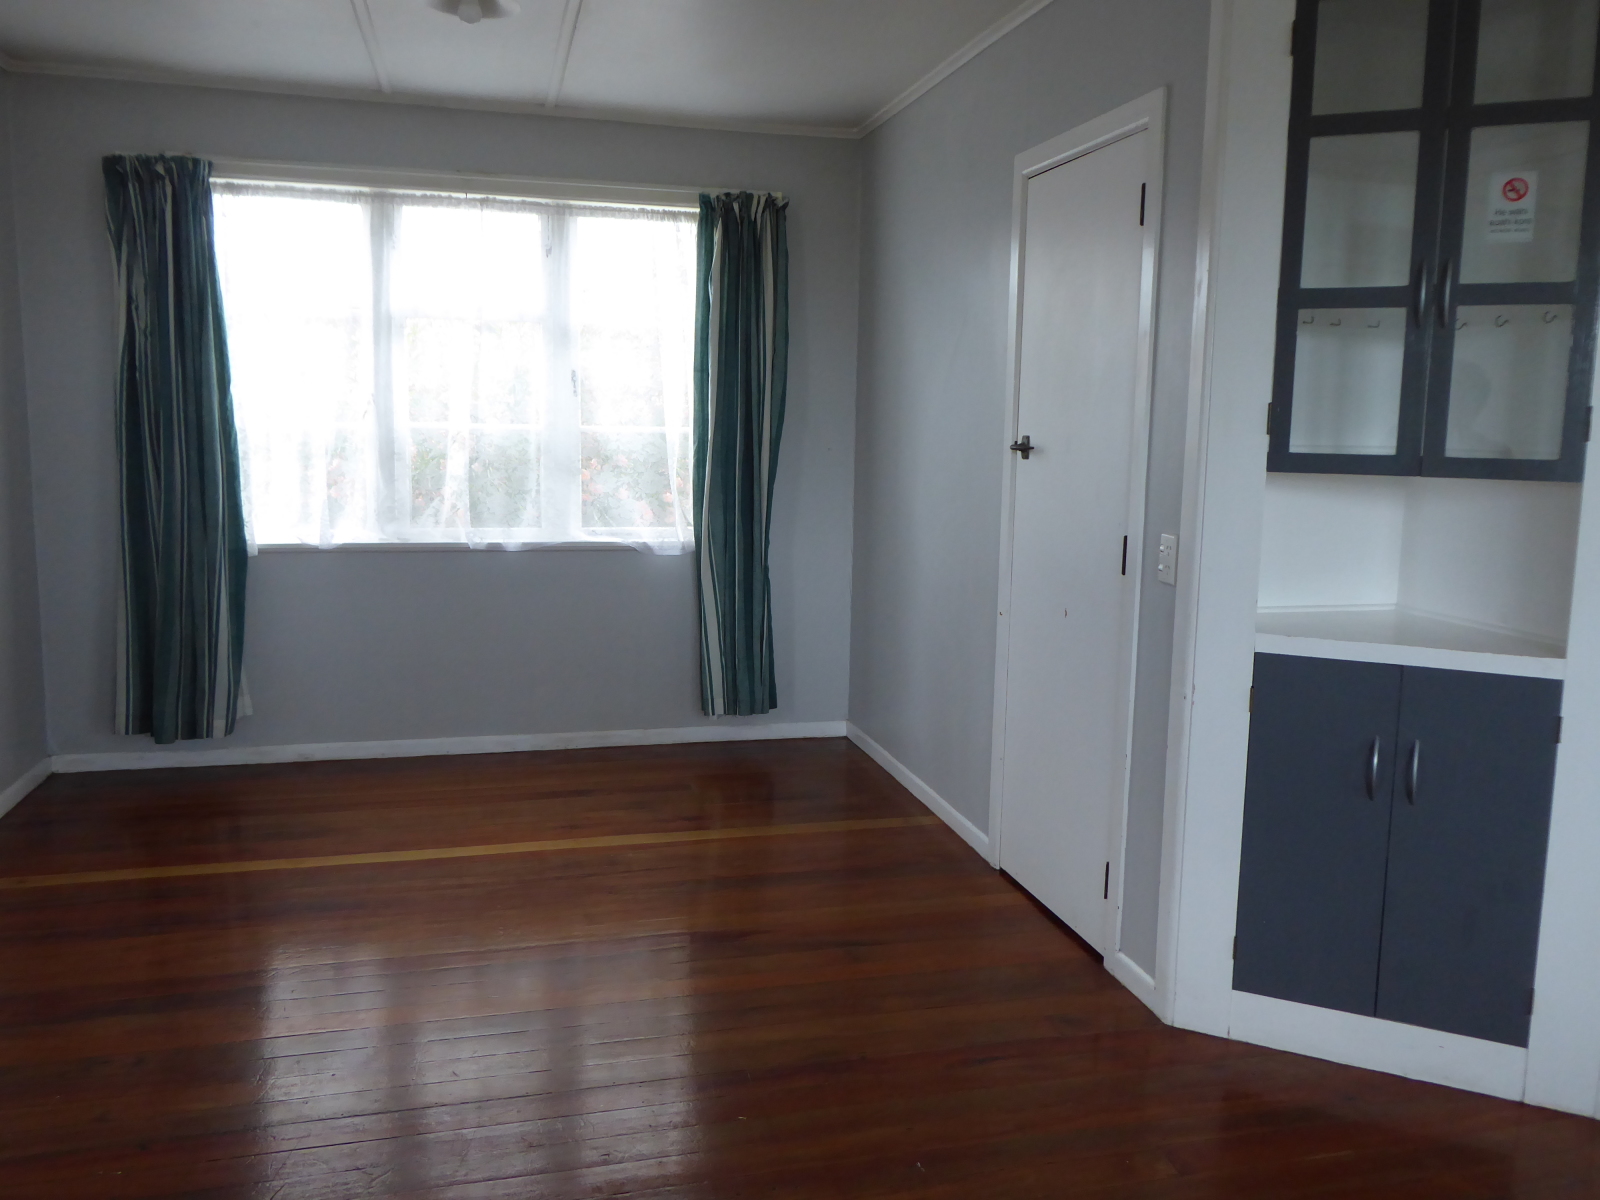 Calling All Investors - Shaw St Kaikohe